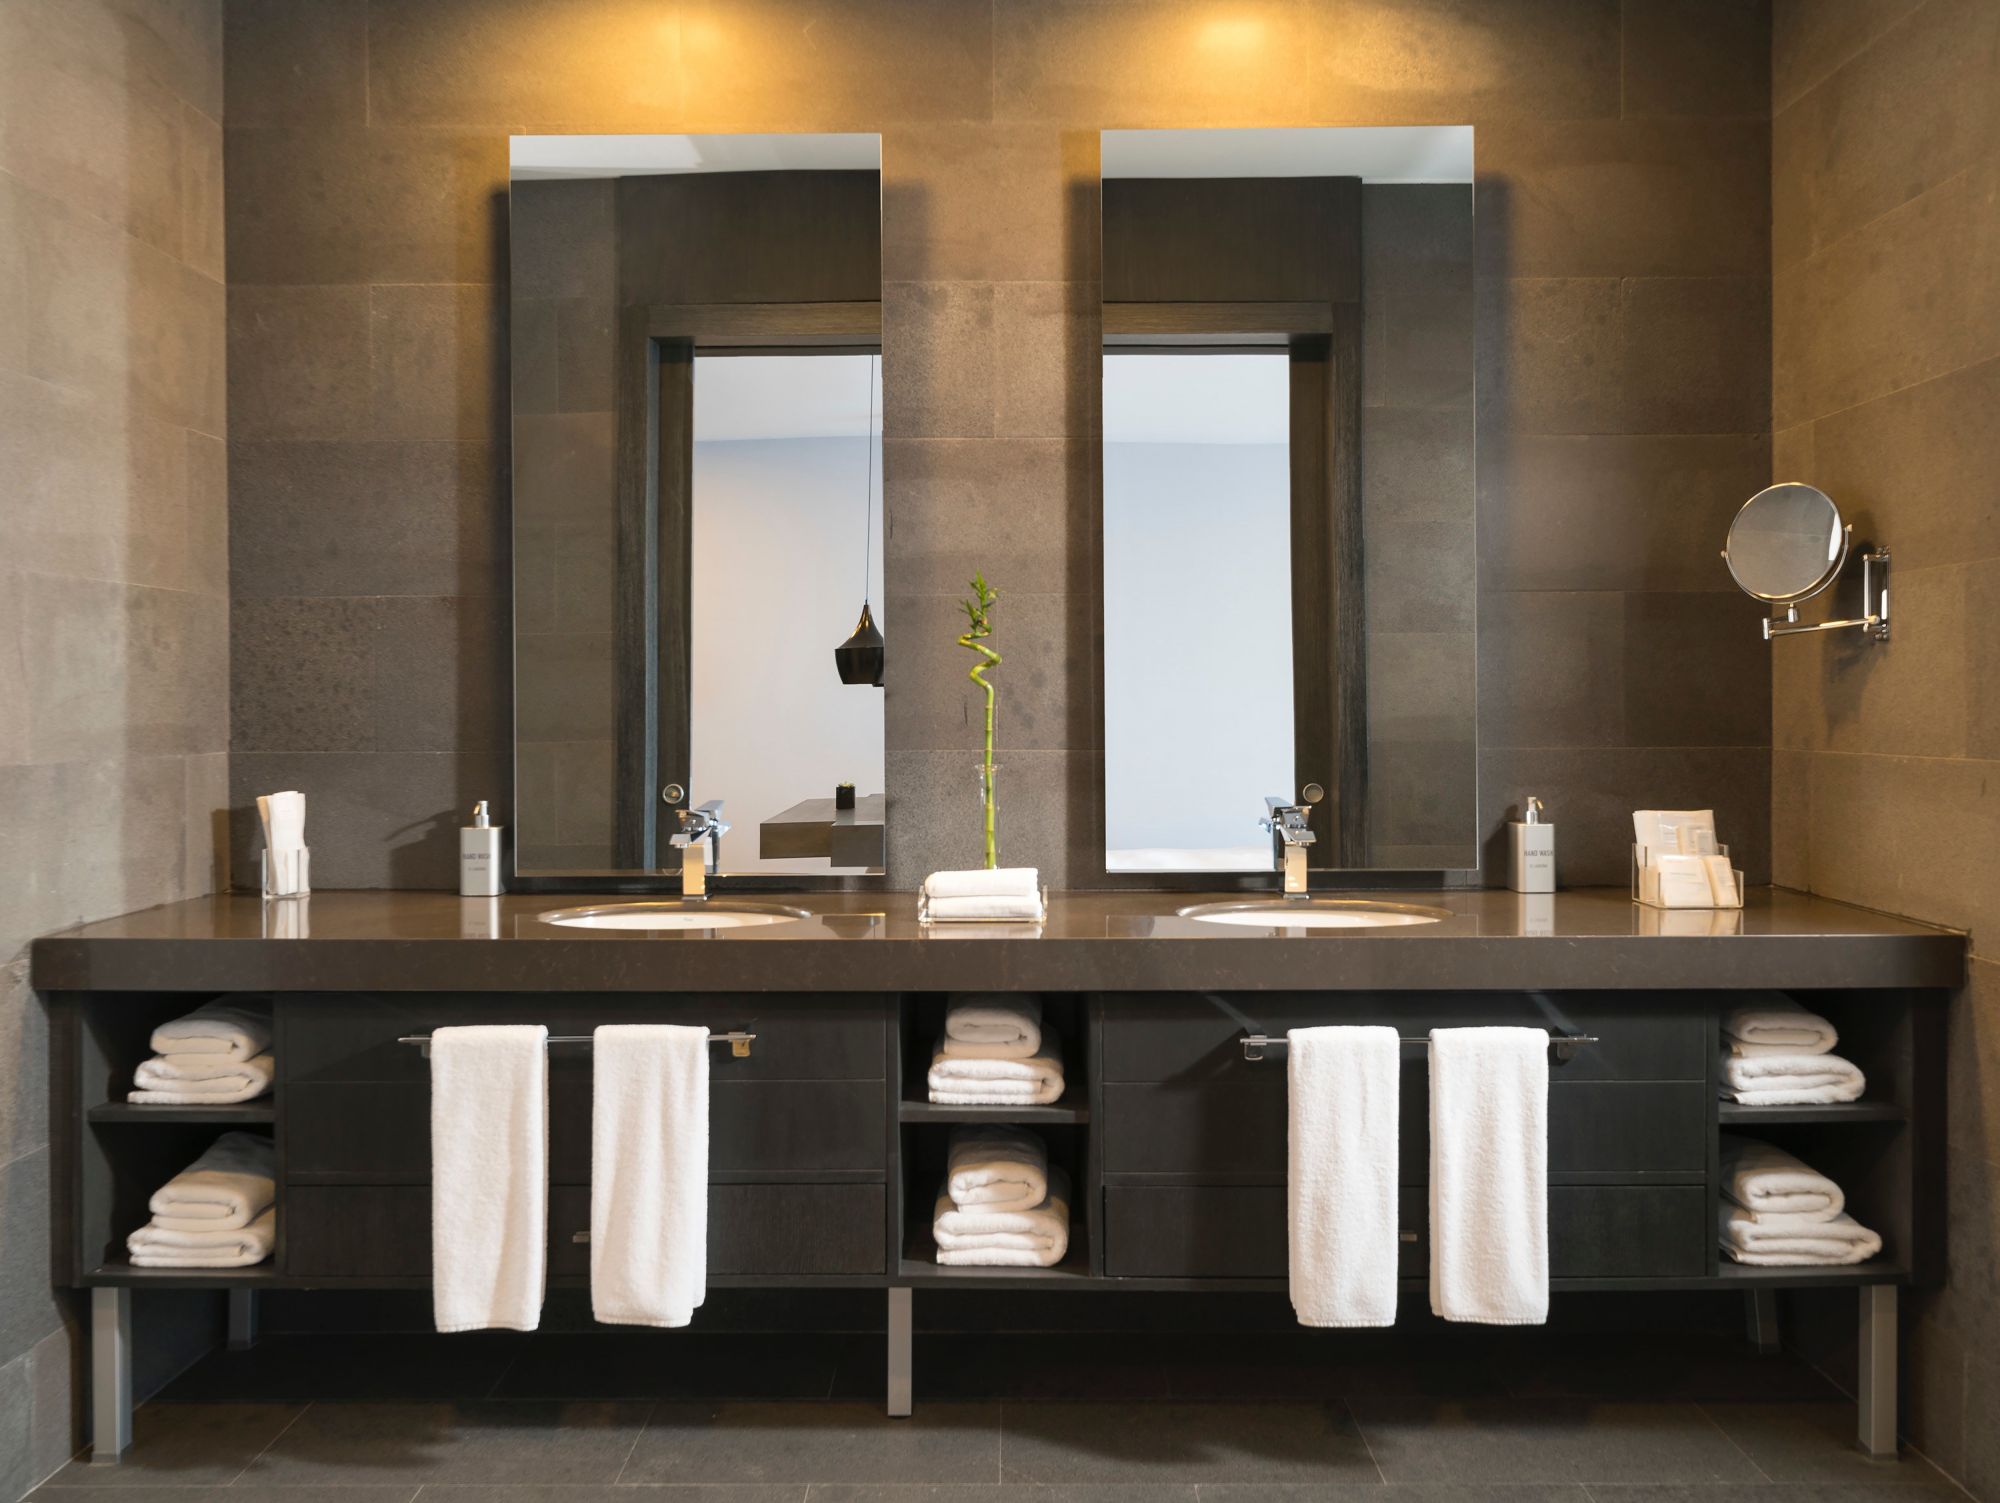 Dark bathroom with twin sinks and dark cabinetry